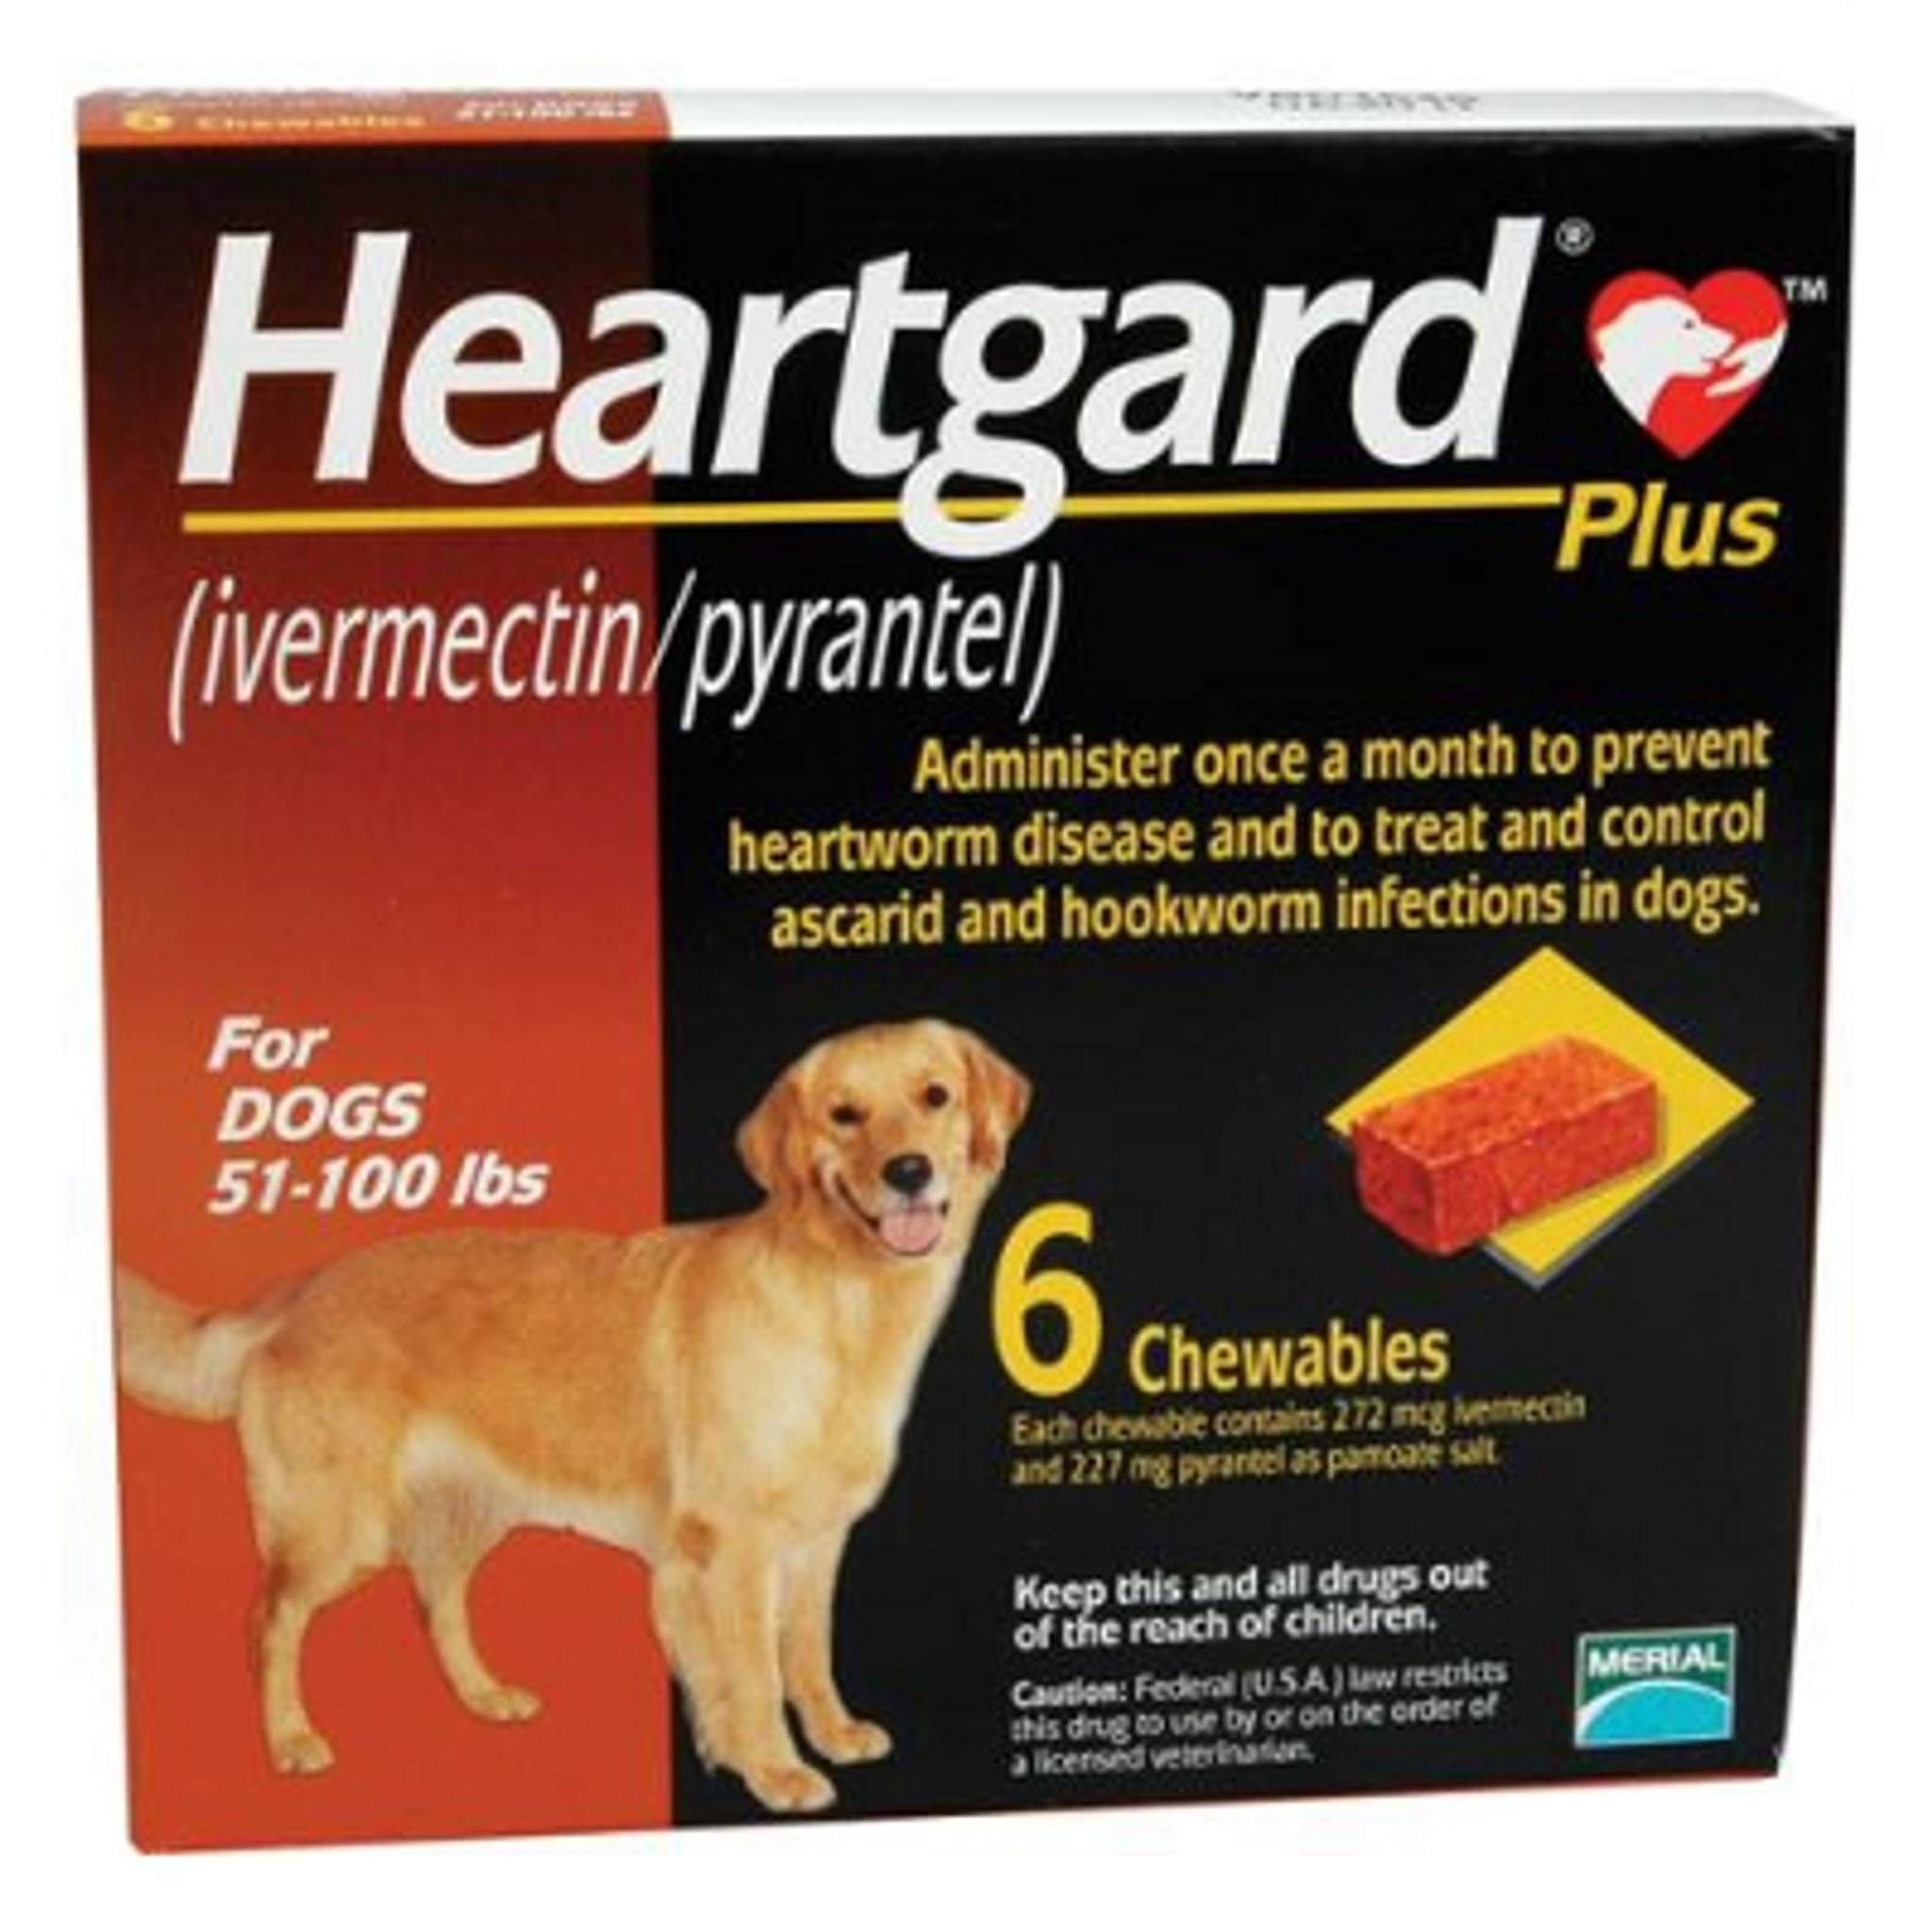 heartgard-plus-chewables-for-dogs-51-100-lbs-brown-6-pack-discount